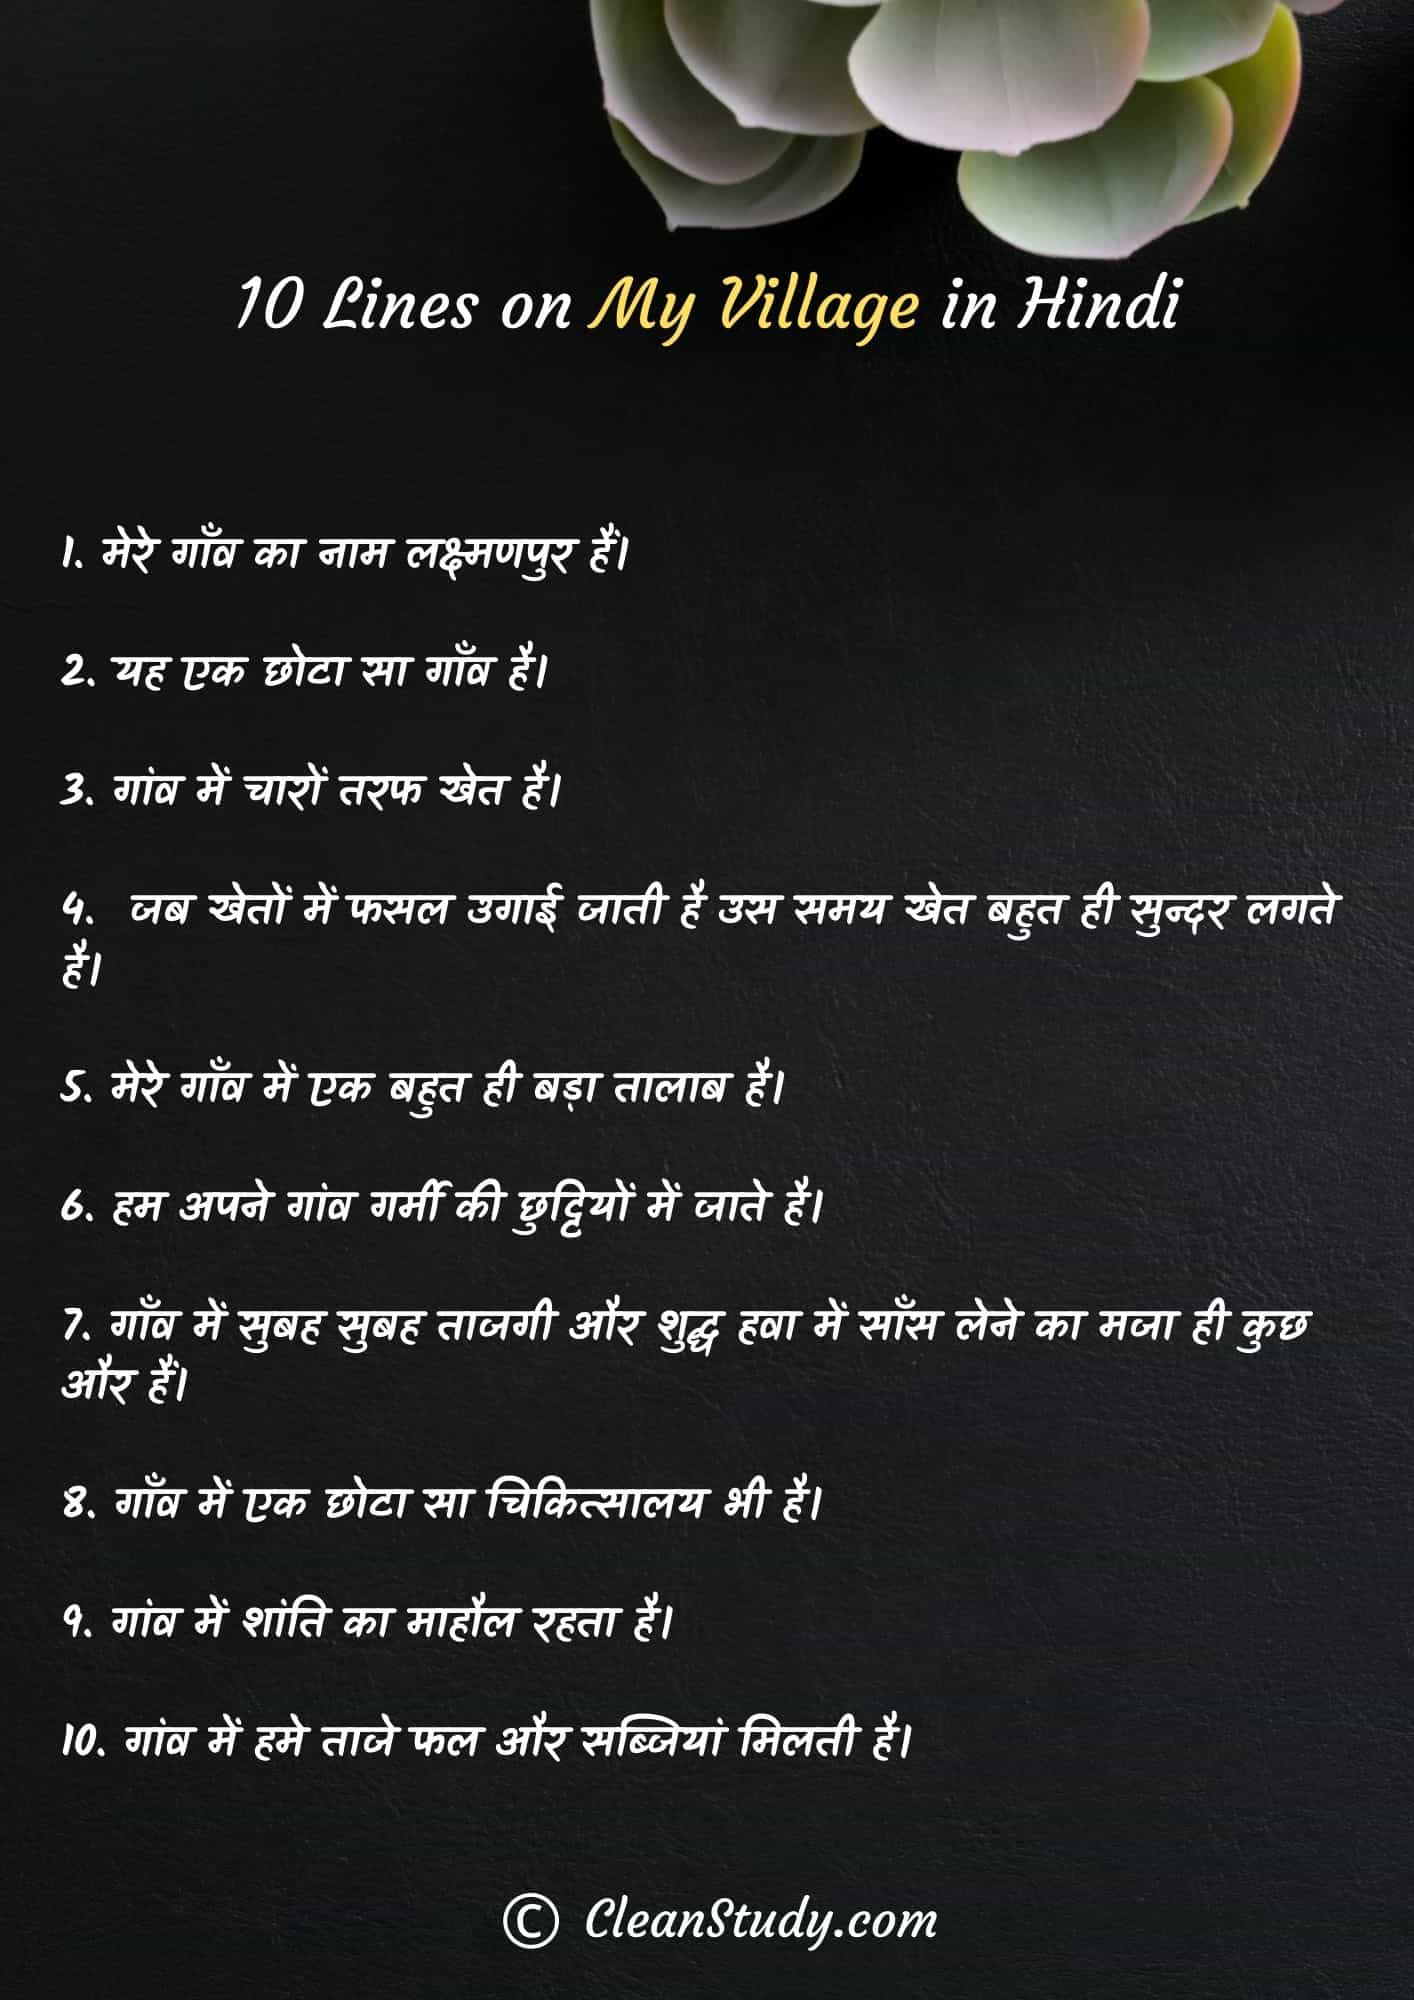 10 Lines on My Village in Hindi